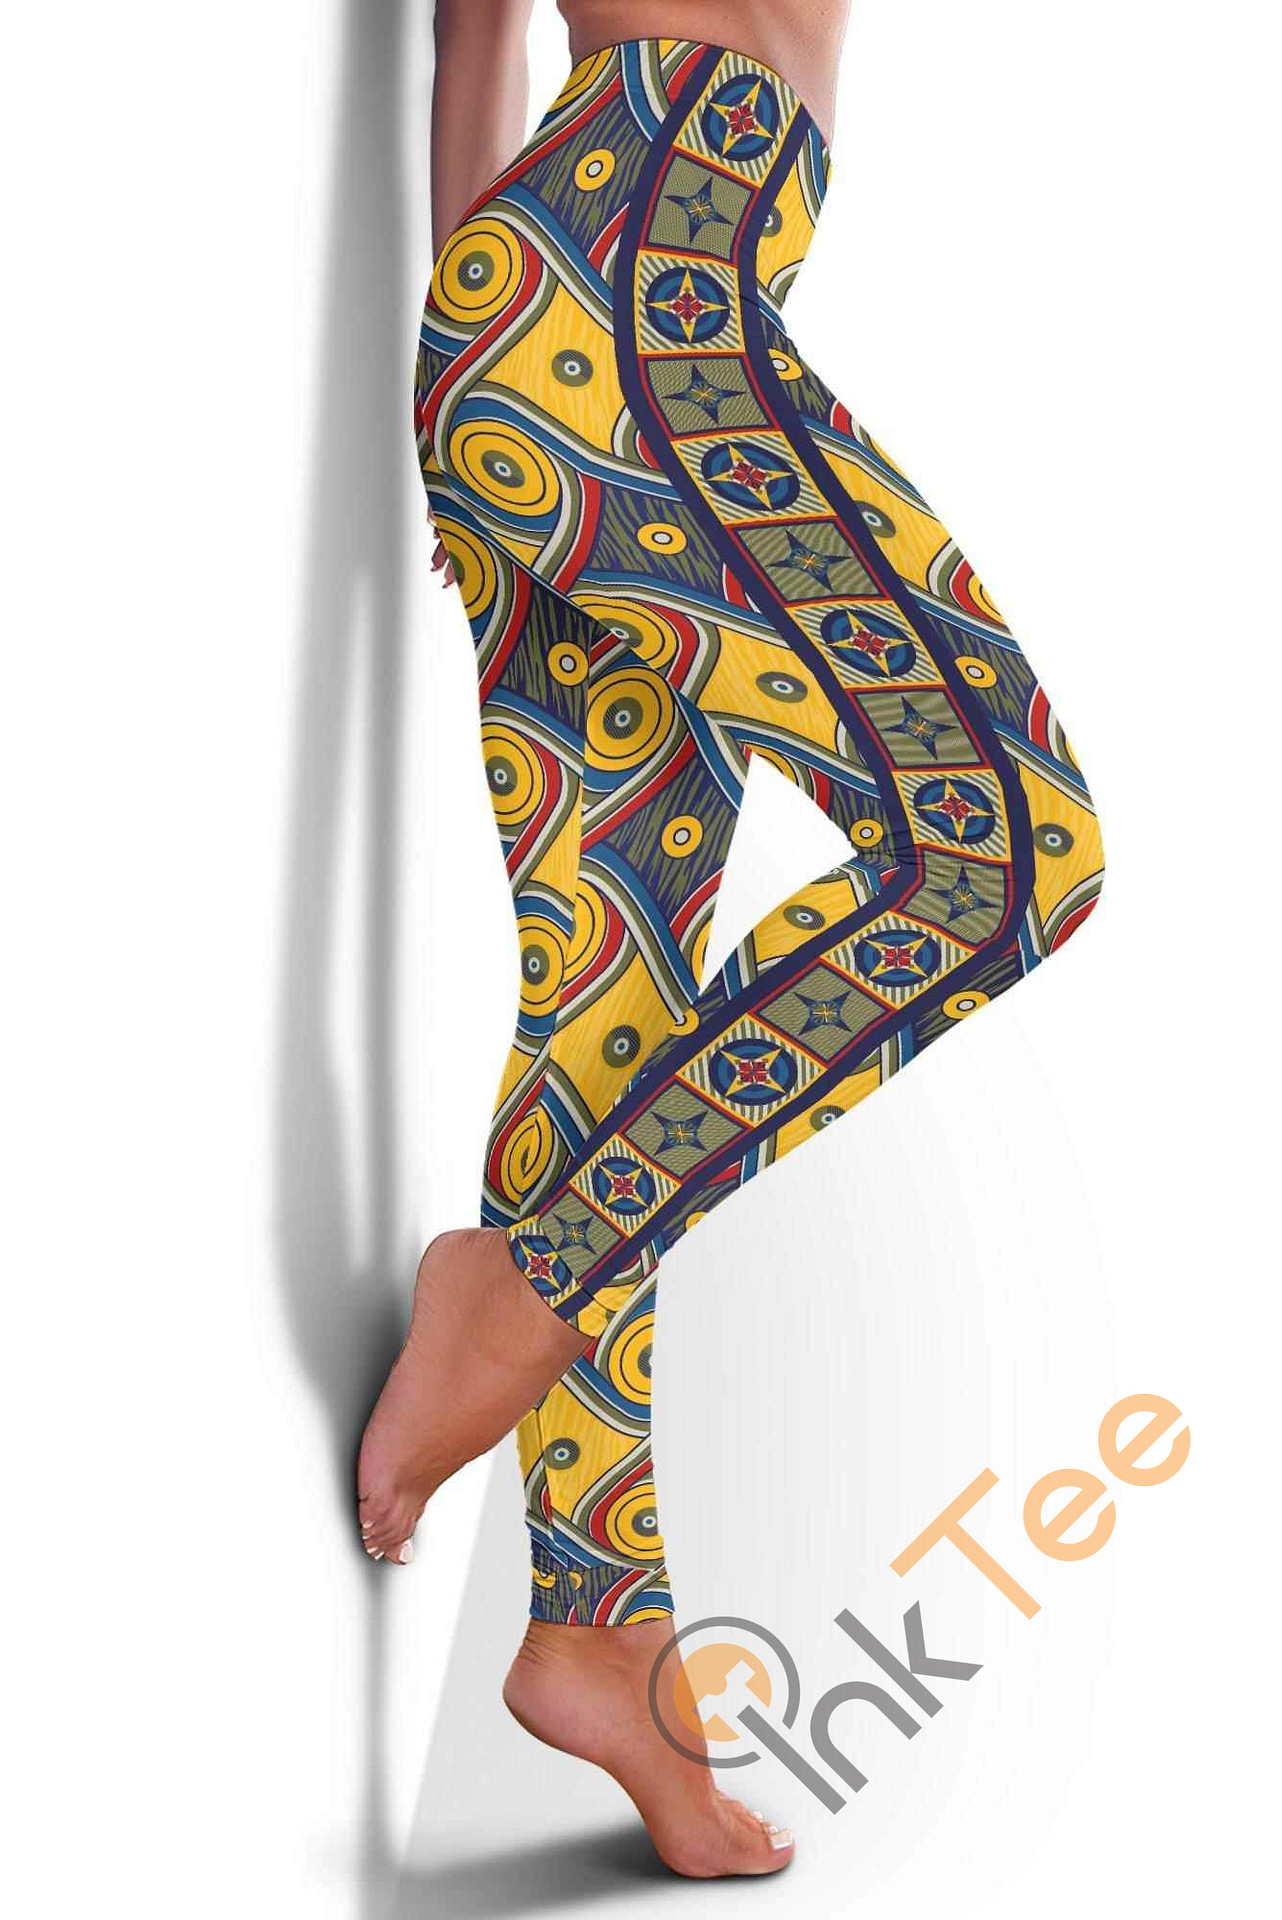 Inktee Store - My Happy Place Gallifrey One High Waist Fashion Yoga Fitness 3D All Over Print For Yoga Fitness Legging Image